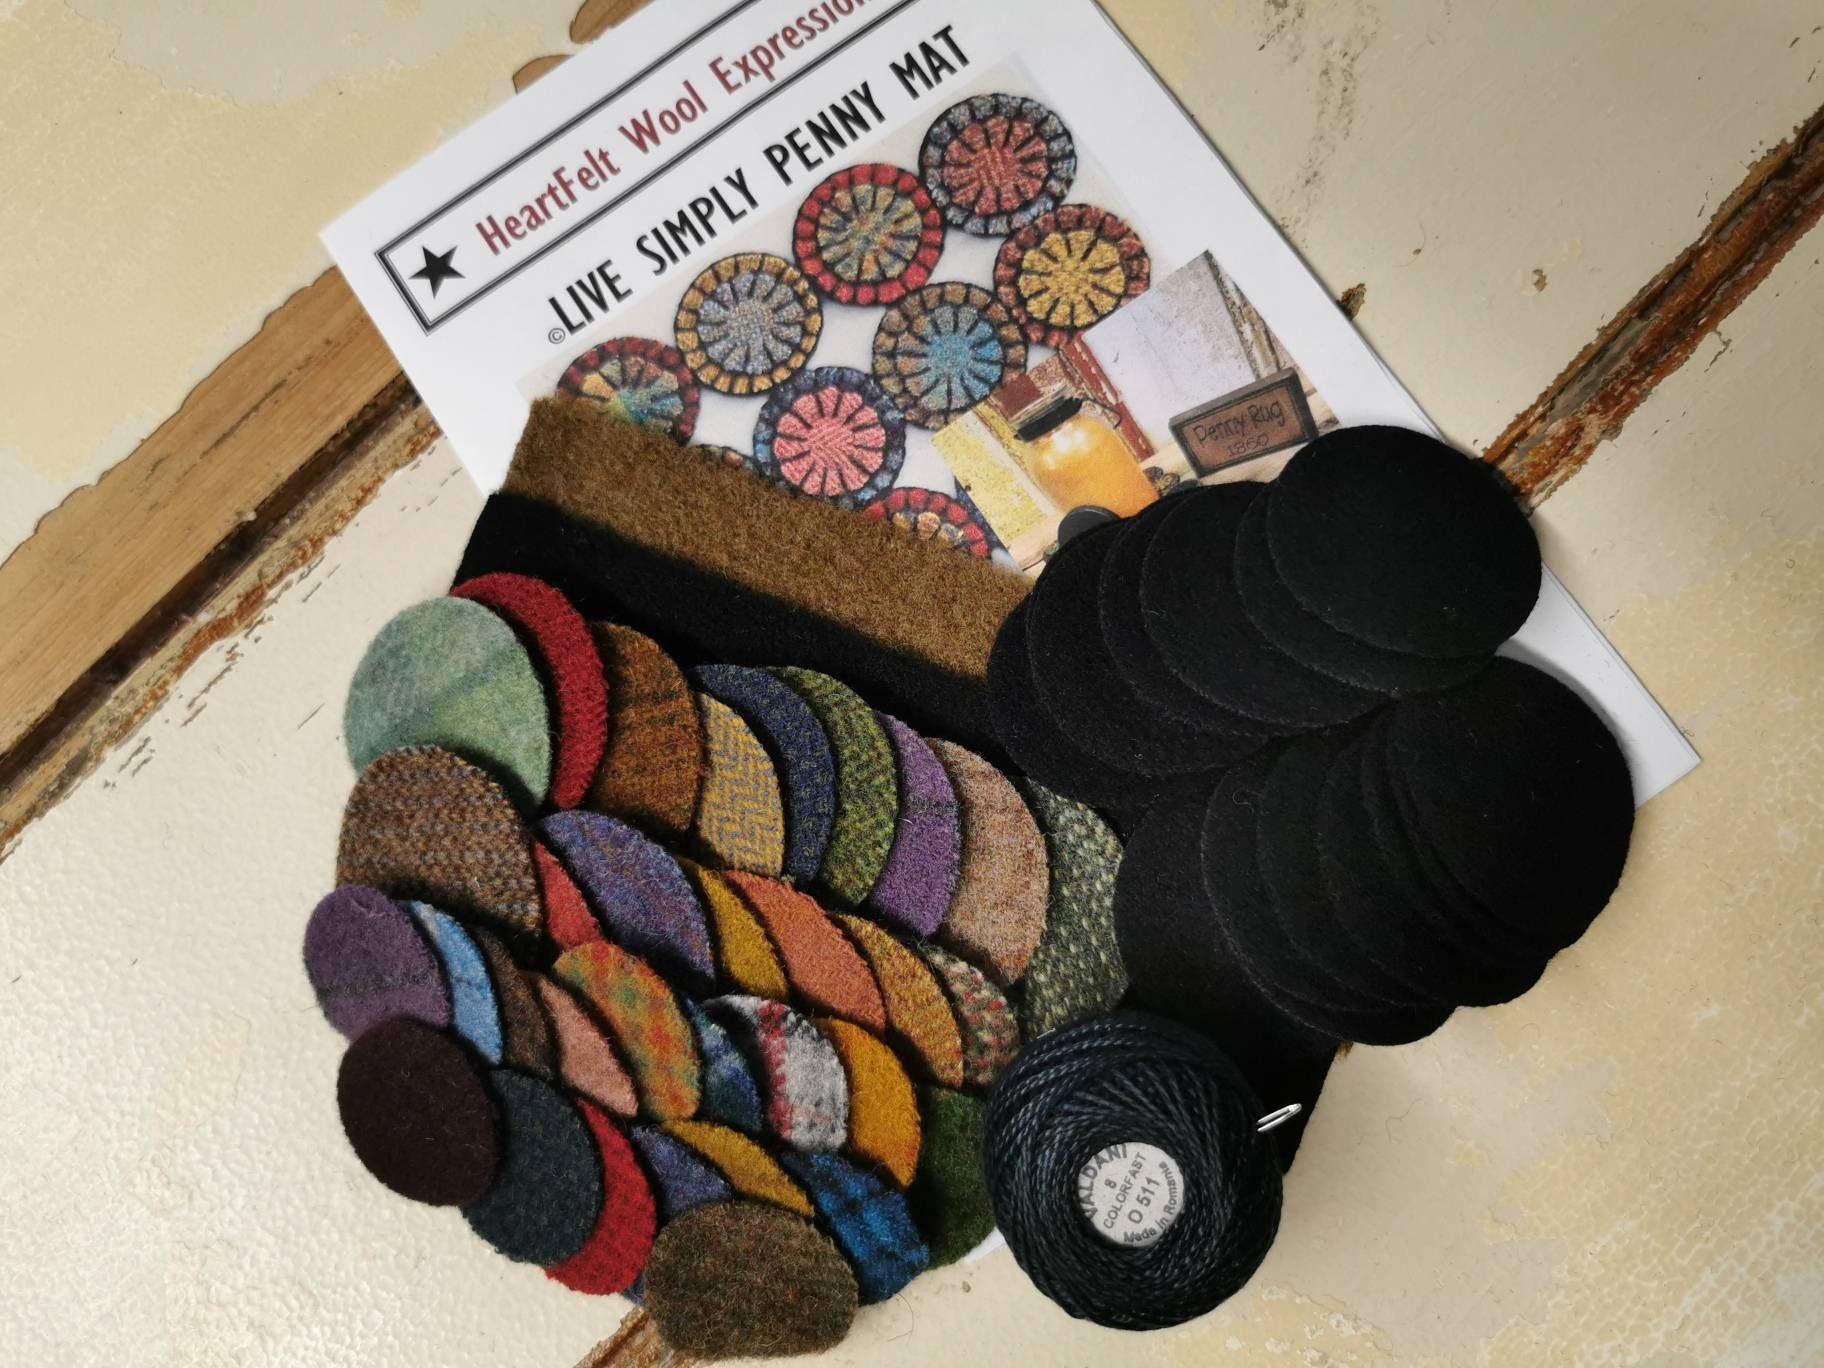 LIVE SIMPLY PENNY Mat Kit - All About Ewe Wool Shop